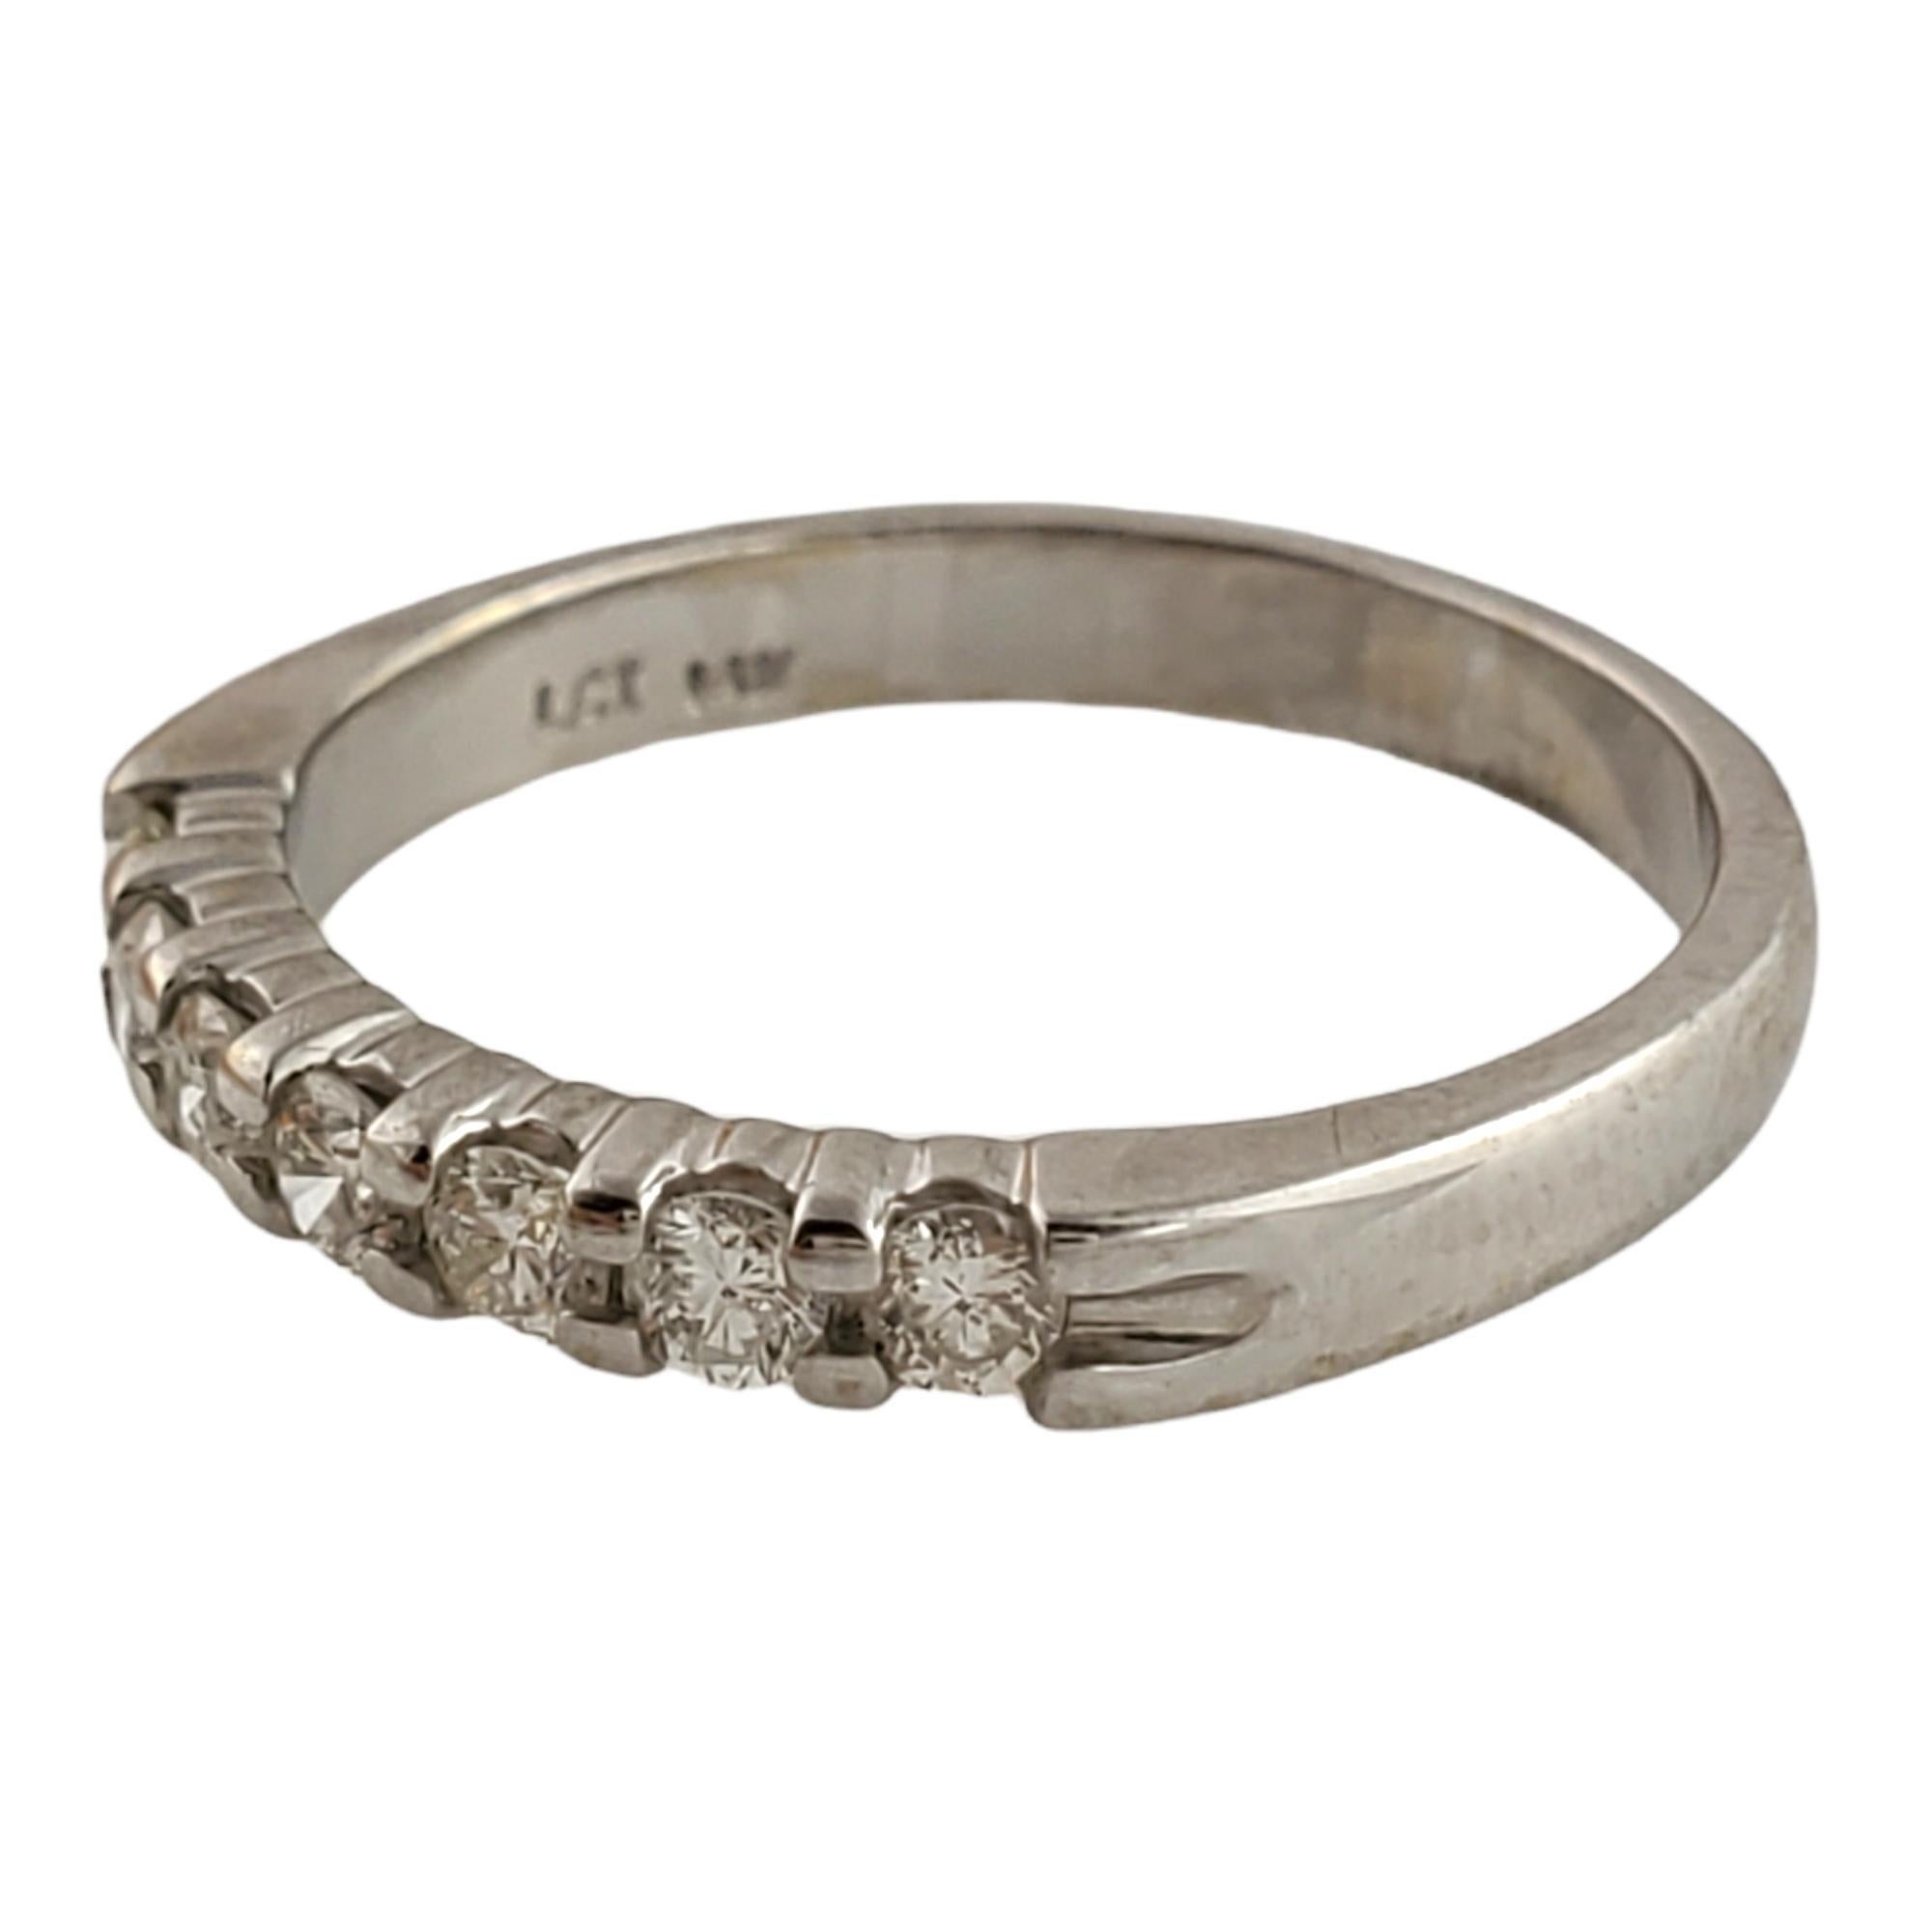 This band is set with 7 round brilliant diamonds.

Diamonds total approximately .28 carats total.

Clarity: SI - I1 clarity

Color:  J color

Shank is approximately 2.5 mm wide.

Hallmarked 14K LCI

2.2 g / 1.4 dwt

This ring is in very good pre